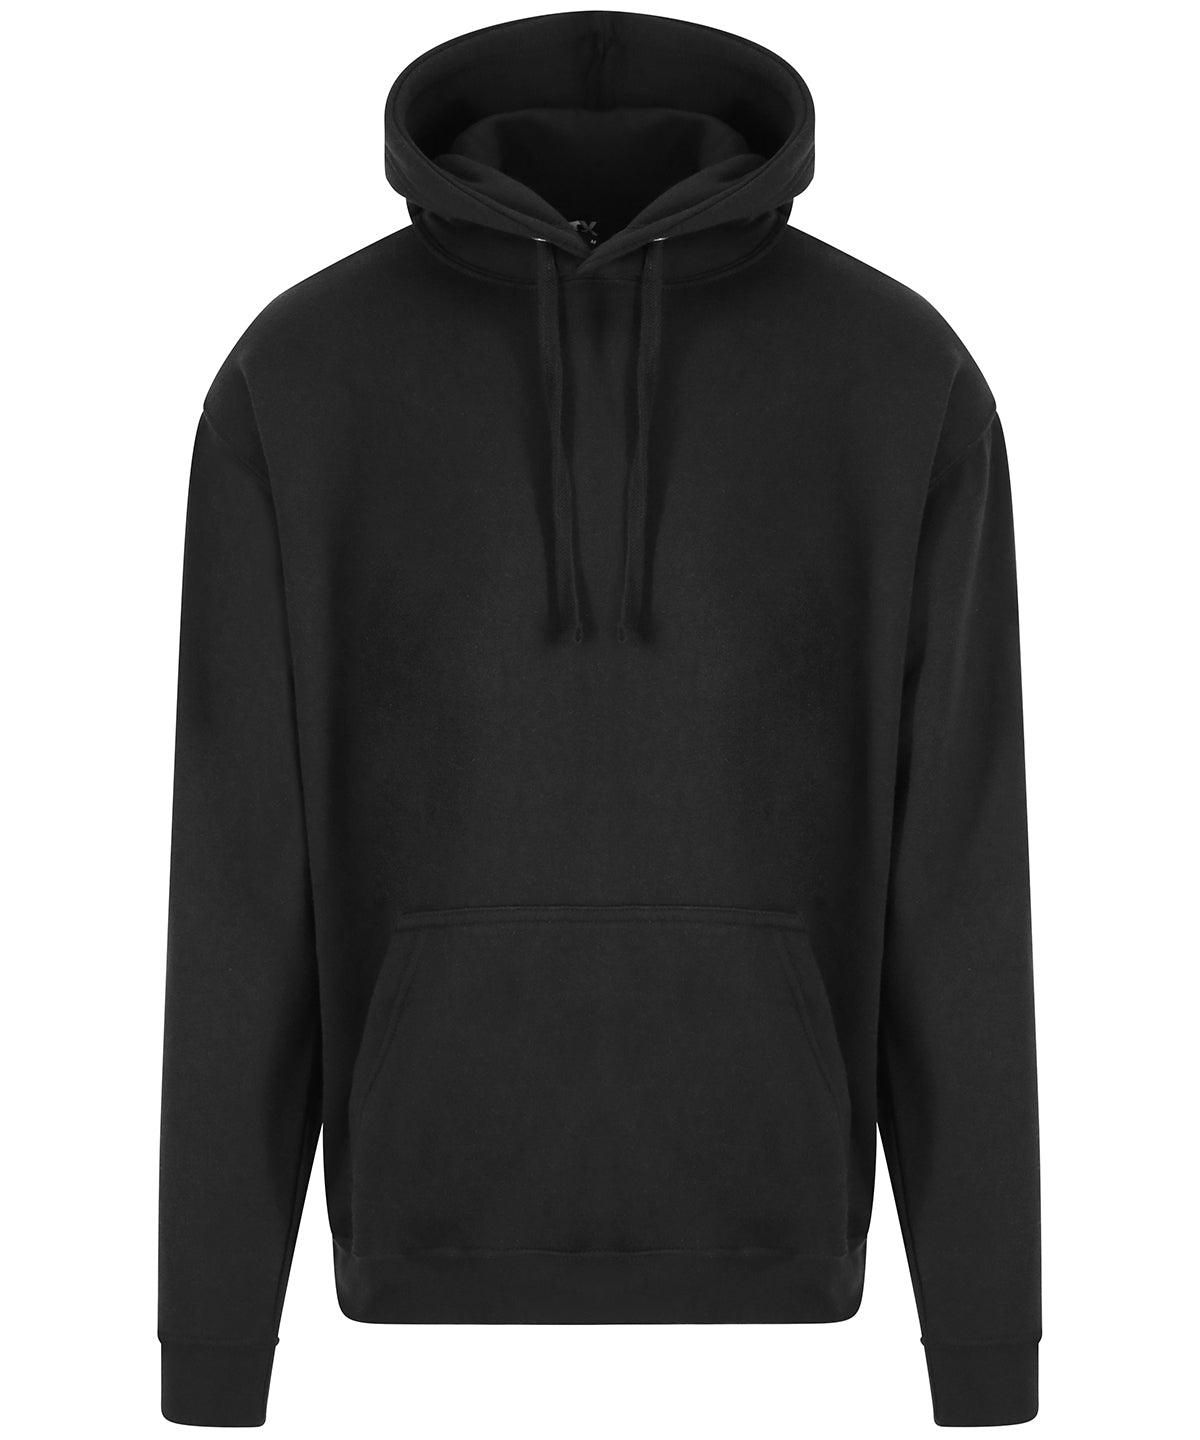 Black* - Pro hoodie Hoodies ProRTX Back to Business, Home of the hoodie, Hoodies, Must Haves, New Colours for 2021, Workwear Schoolwear Centres